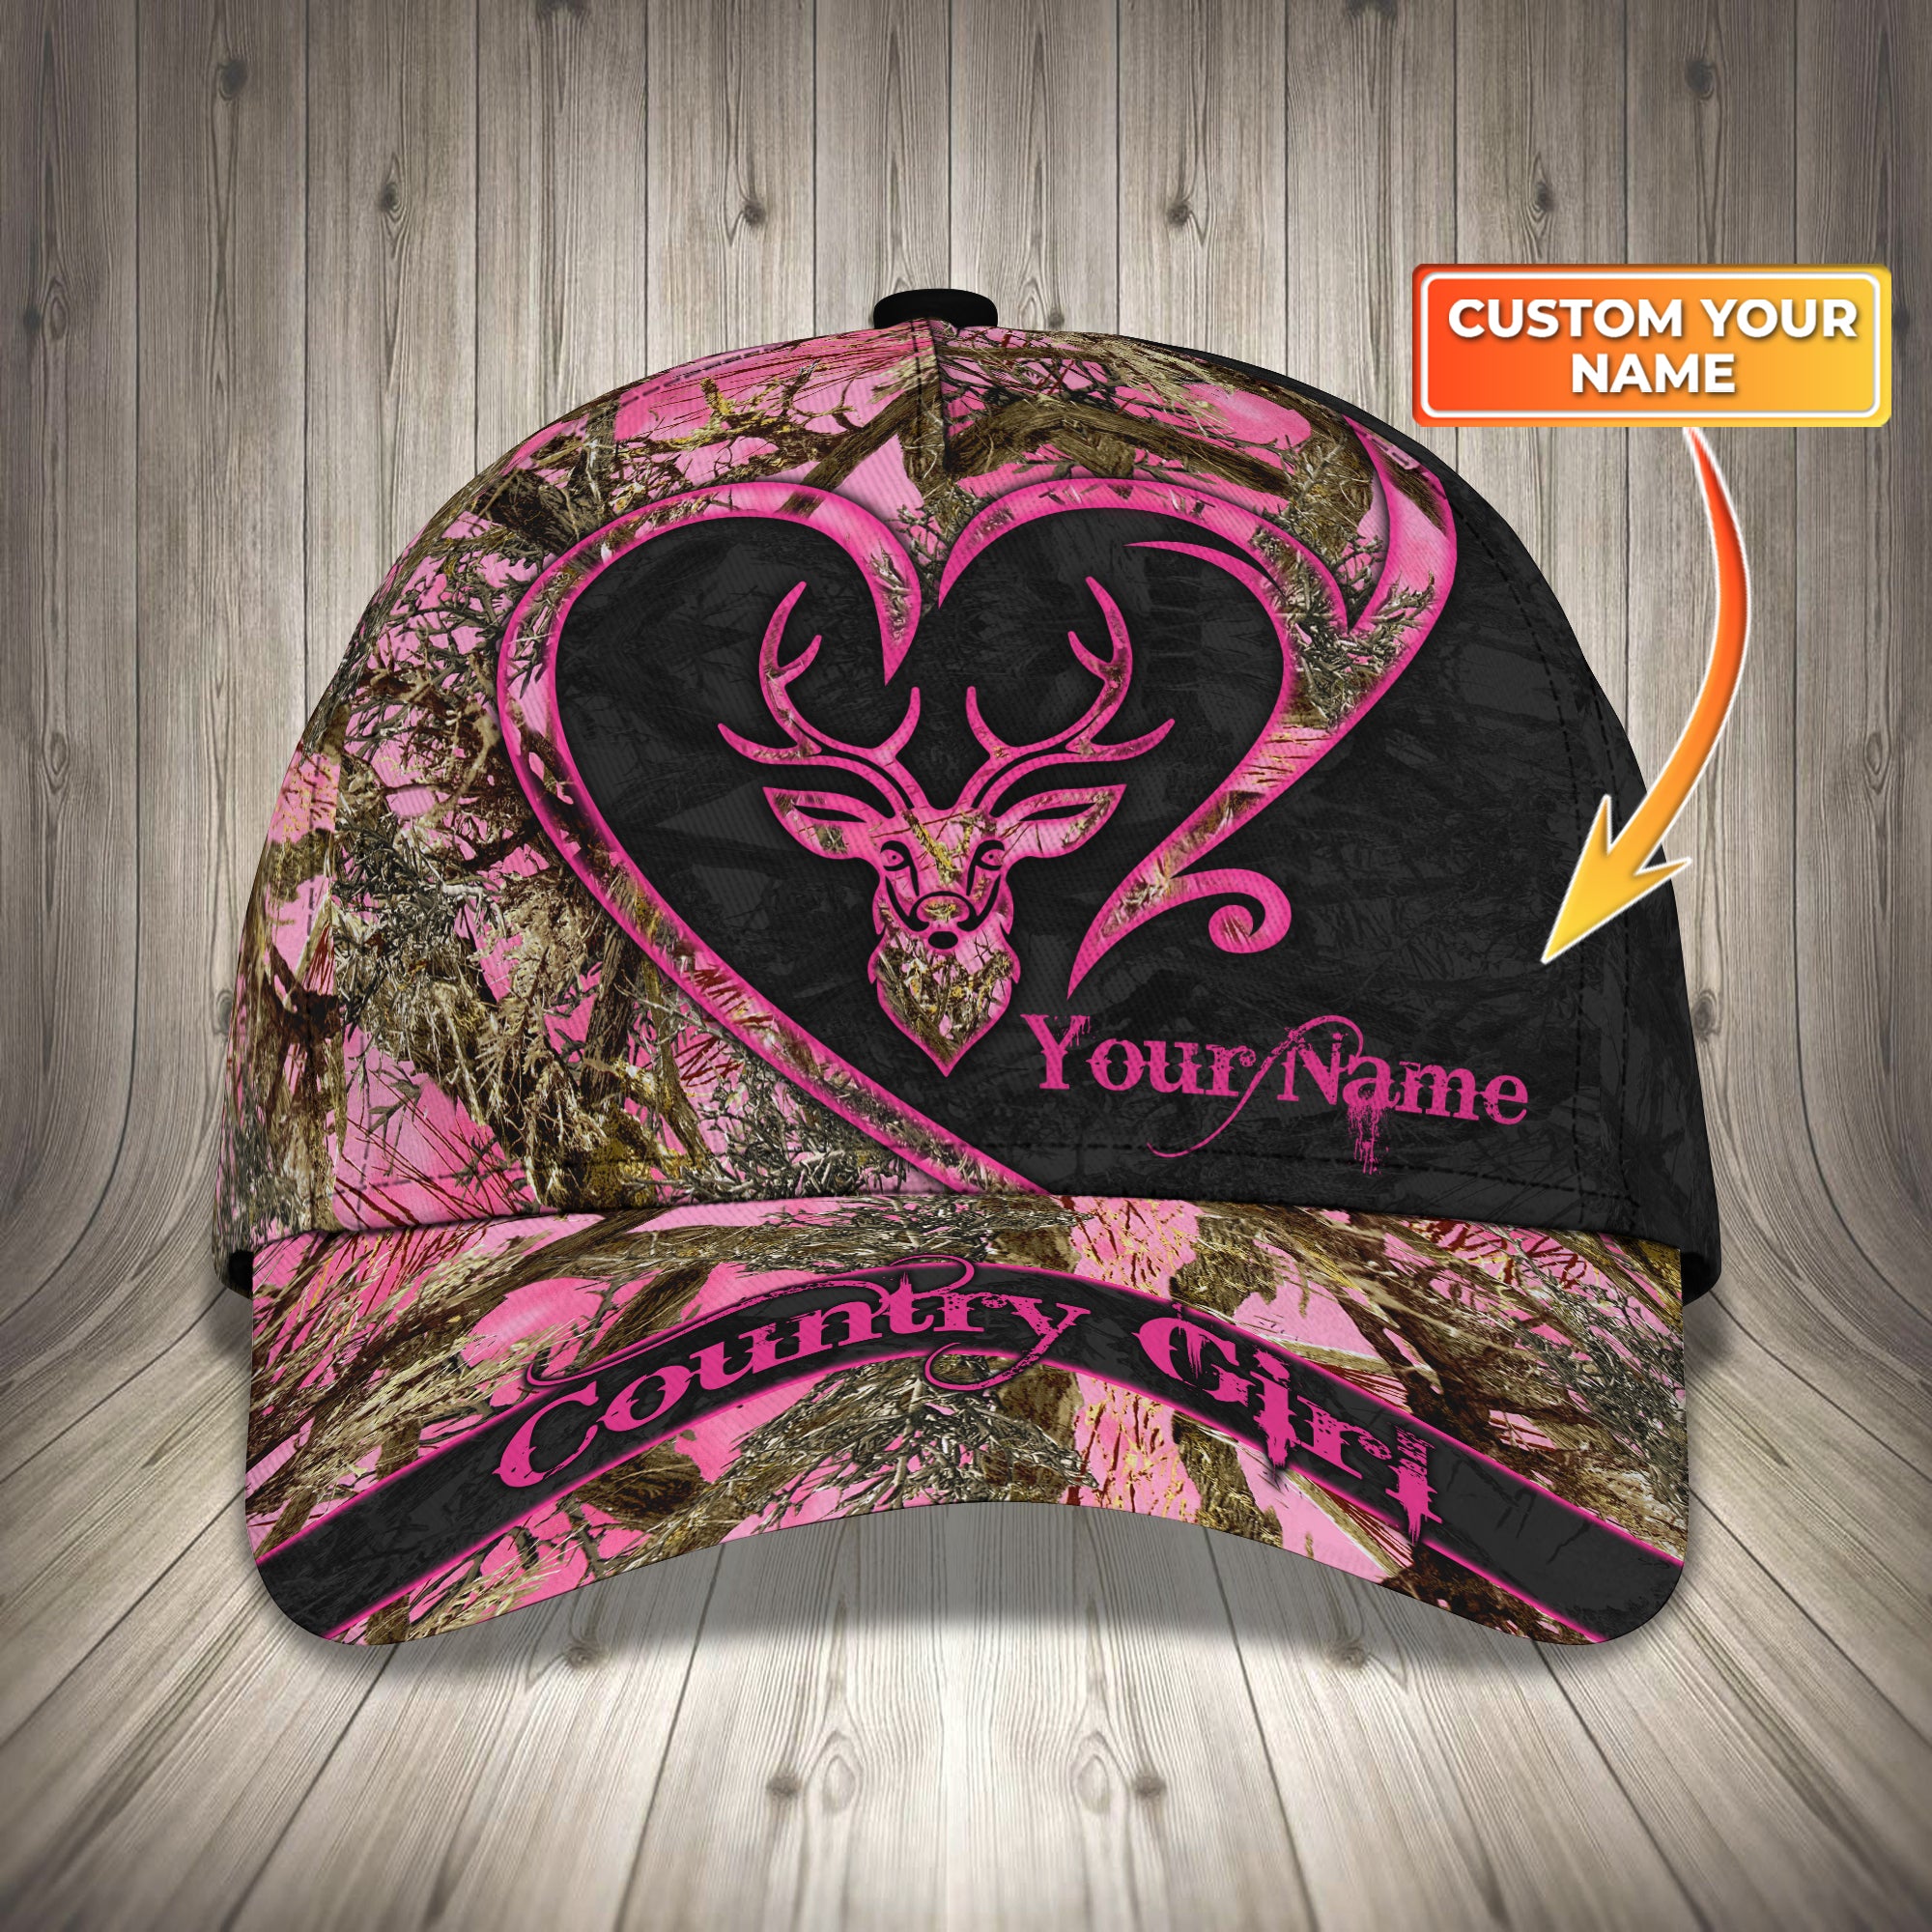 Country Girl - Personalized Name Cap - TT99-1117